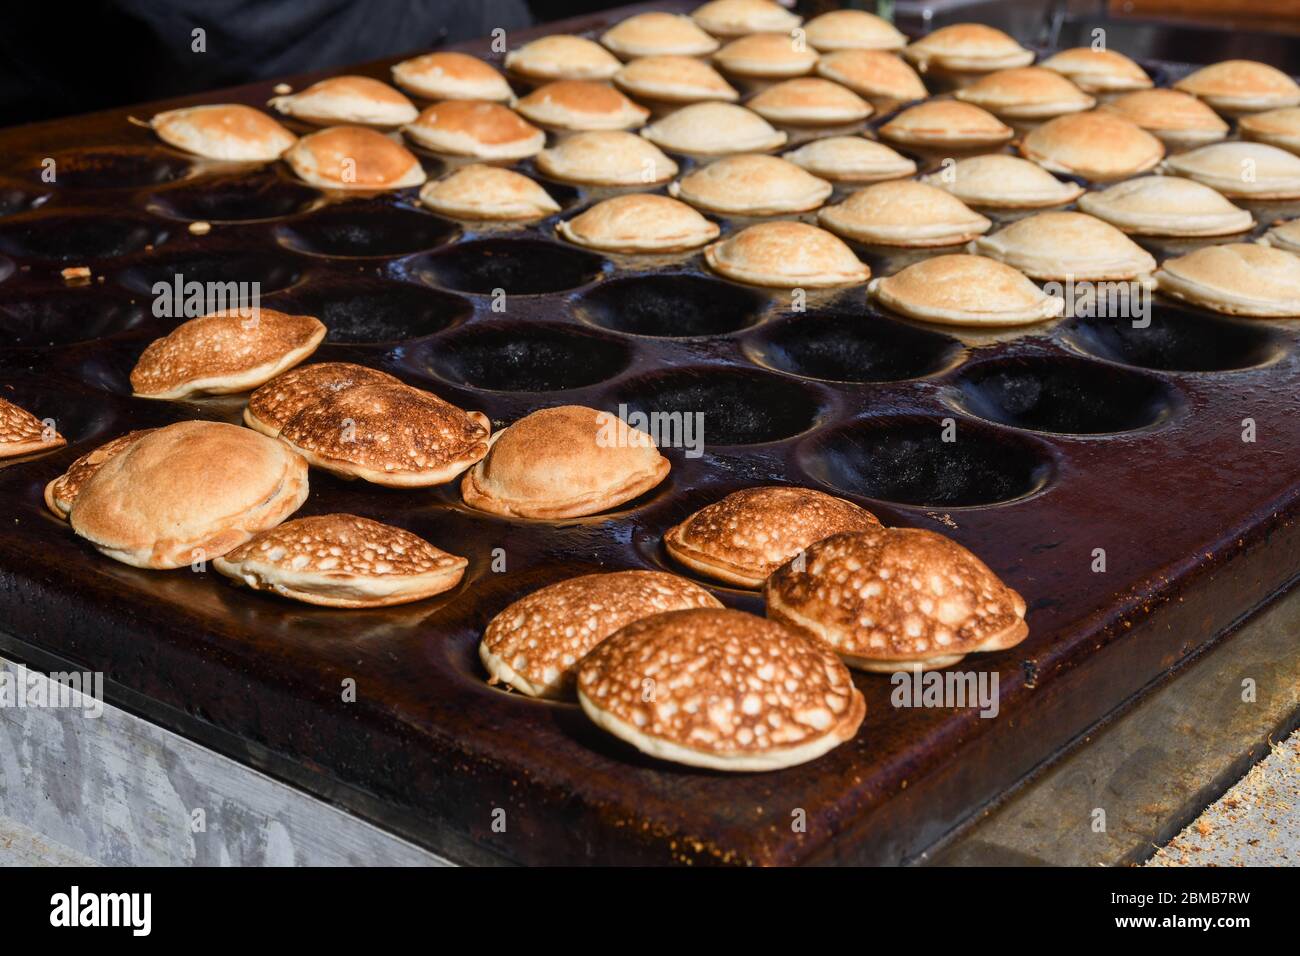 https://c8.alamy.com/comp/2BMB7RW/typical-dutch-poffertjes-tiny-pancakes-being-baked-on-a-heavy-cast-iron-pan-being-prepared-during-street-food-festival-an-outdoor-event-traditiona-2BMB7RW.jpg